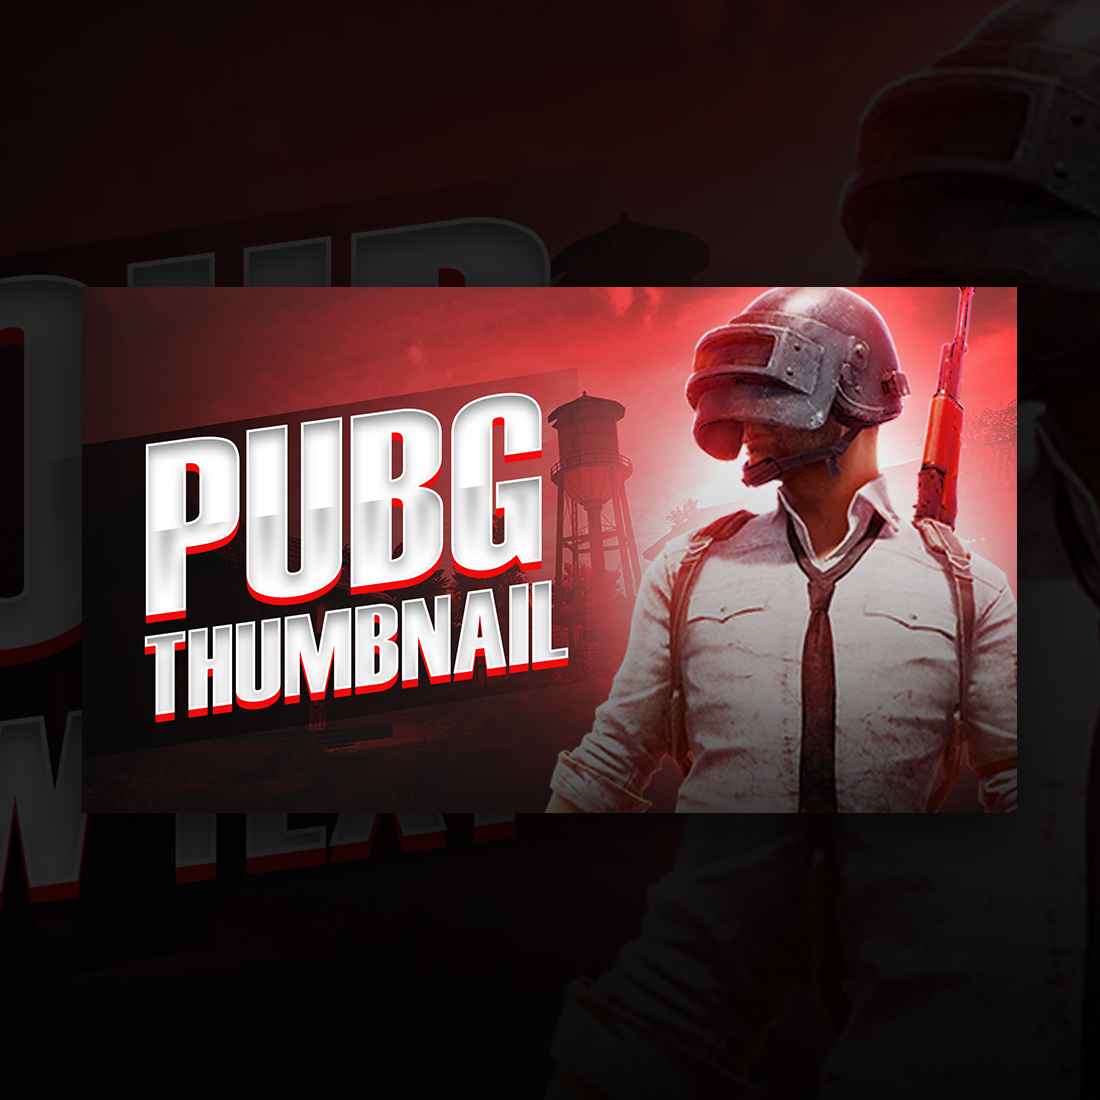 Red PUBG thumbnail for streamers cover image.